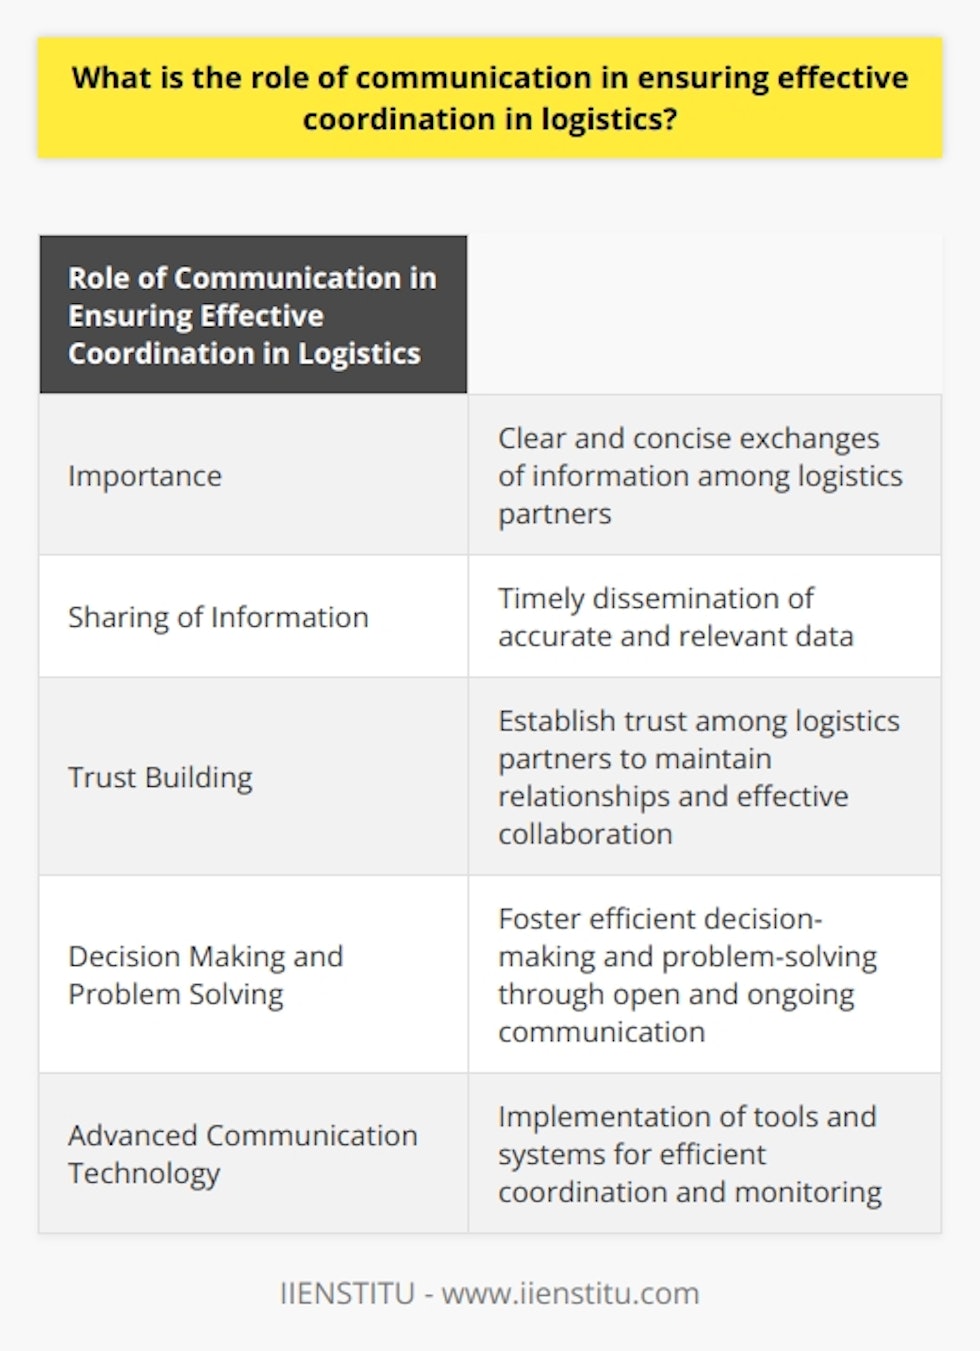 Effective communication is of utmost importance in ensuring effective coordination in logistics. It involves clear and concise exchanges of information among various logistics partners, including suppliers, transportation providers, warehousing facilities, and end customers.One crucial aspect of communication in logistics is the sharing of accurate and relevant information. Timely dissemination of data such as order statuses, inventory levels, and shipment tracking enables all stakeholders to have a comprehensive understanding of their roles and responsibilities. This transparency helps to avoid misunderstandings that could lead to wasted resources, delays, or significant financial losses.Transparent communication also contributes to the establishment of trust among logistics partners. Trust is crucial in maintaining long-term relationships and enables effective collaboration. When all parties involved clearly understand the expectations and have assurance about the responsibilities being fulfilled, they are more likely to work efficiently together.Open and ongoing communication is critical in fostering efficient decision-making and problem-solving within logistics. As unforeseen challenges and events arise, the ability to communicate rapidly and effectively is key to addressing and resolving issues promptly. When all involved parties can quickly adapt and adjust their operations in response to changing circumstances, the entire logistics network benefits.Furthermore, the implementation of advanced communication technology enhances efficient coordination in logistics. Tools such as transportation management systems, real-time shipment tracking, and data analytics allow for quicker dissemination and better monitoring of important information across the supply chain. The integration of these systems can further streamline communication processes, resulting in improved efficiency, cost-savings, and ultimately, meeting customer expectations.In summary, effective communication plays a vital role in coordinating logistics operations. By promoting the accurate exchange of information, fostering trust among partners, enabling quick decision-making and problem-solving, and leveraging technology advancements, communication contributes significantly to the success of any logistics network.